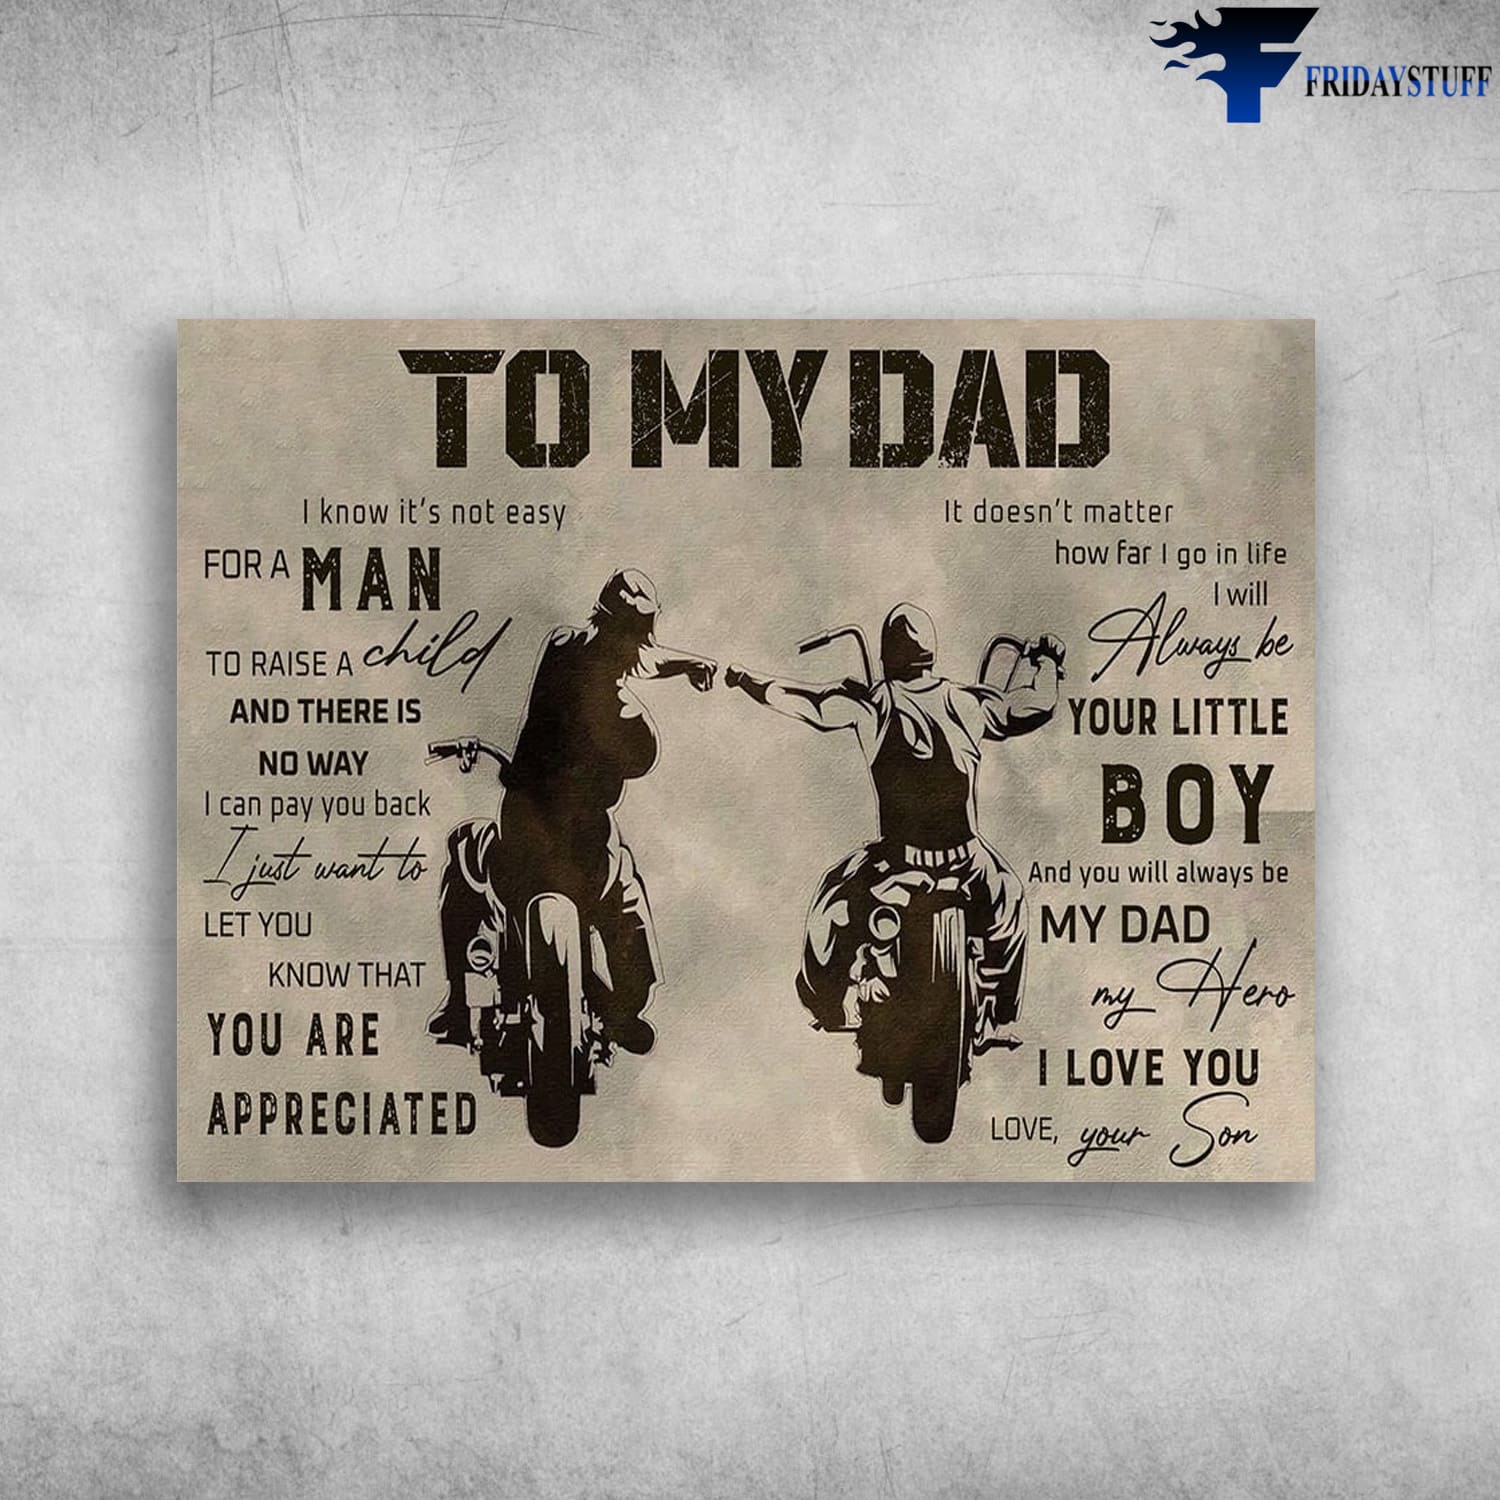 Dad And Son, Motocycle Lover, Biker Poster, To My Dad, I Know It's Not Easy For A Man, To Raise A Child, And There Is No Way, I Can Pay You Back, I Just Want To Let You Know That, You Are Appreciated